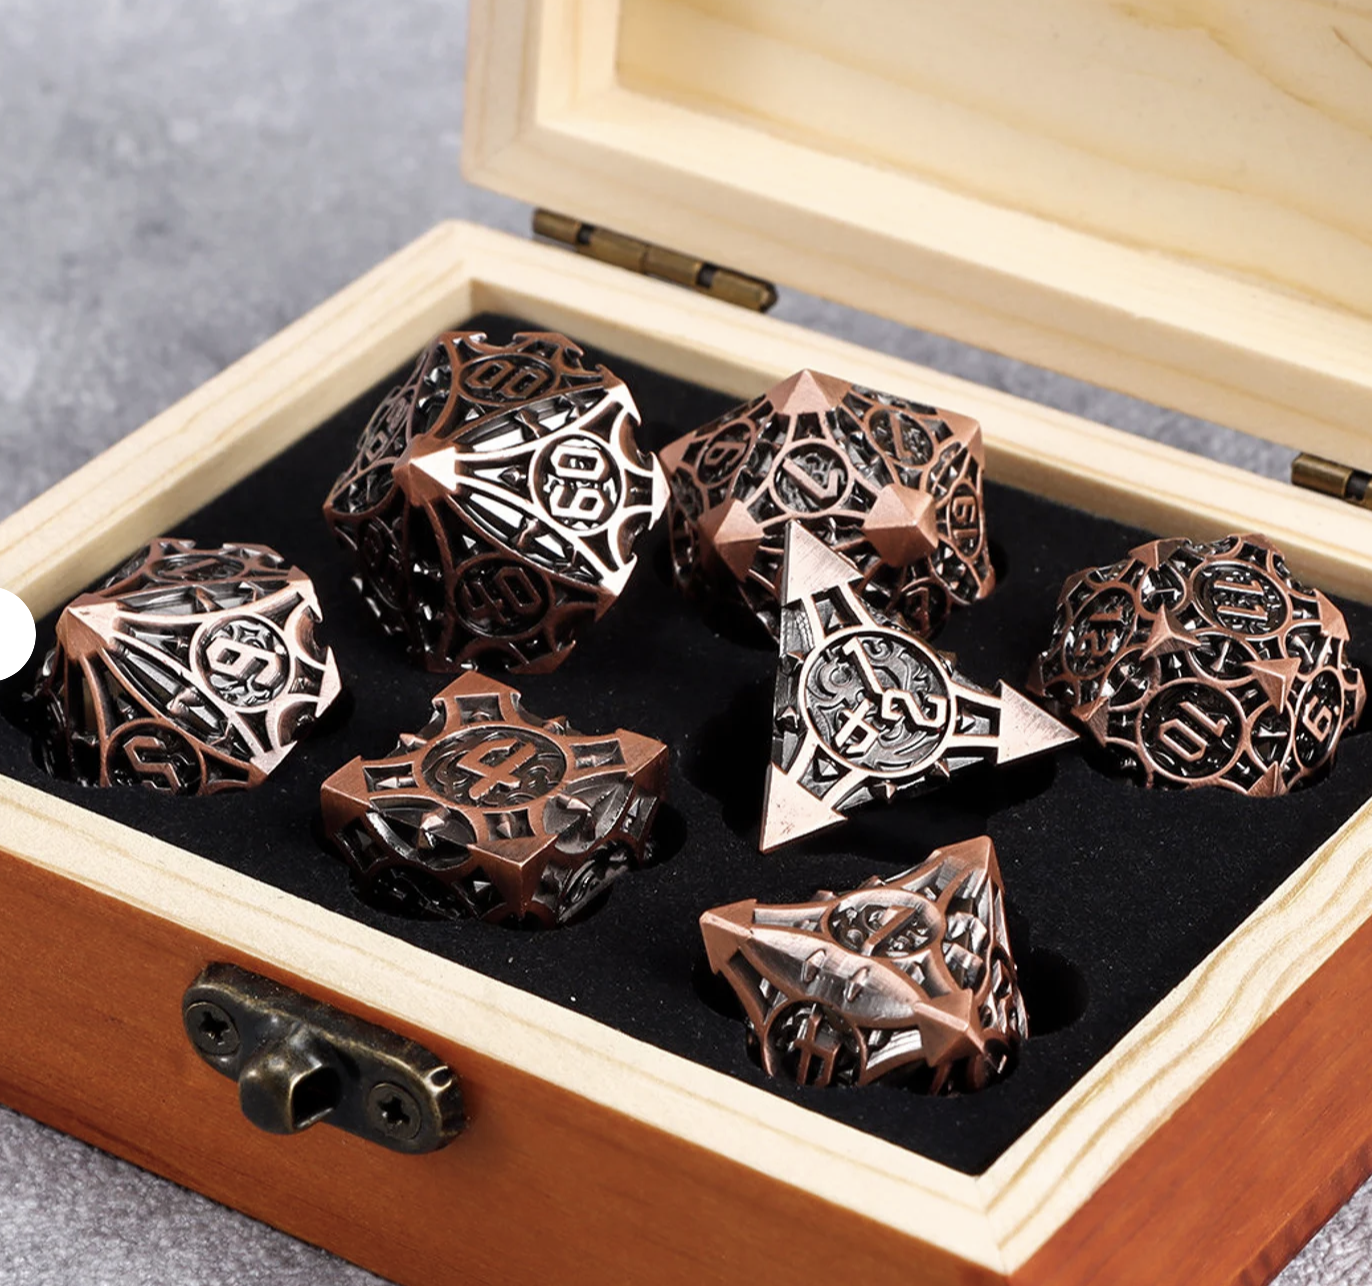 Metal D&D dice, handmade and sitting in a box. 